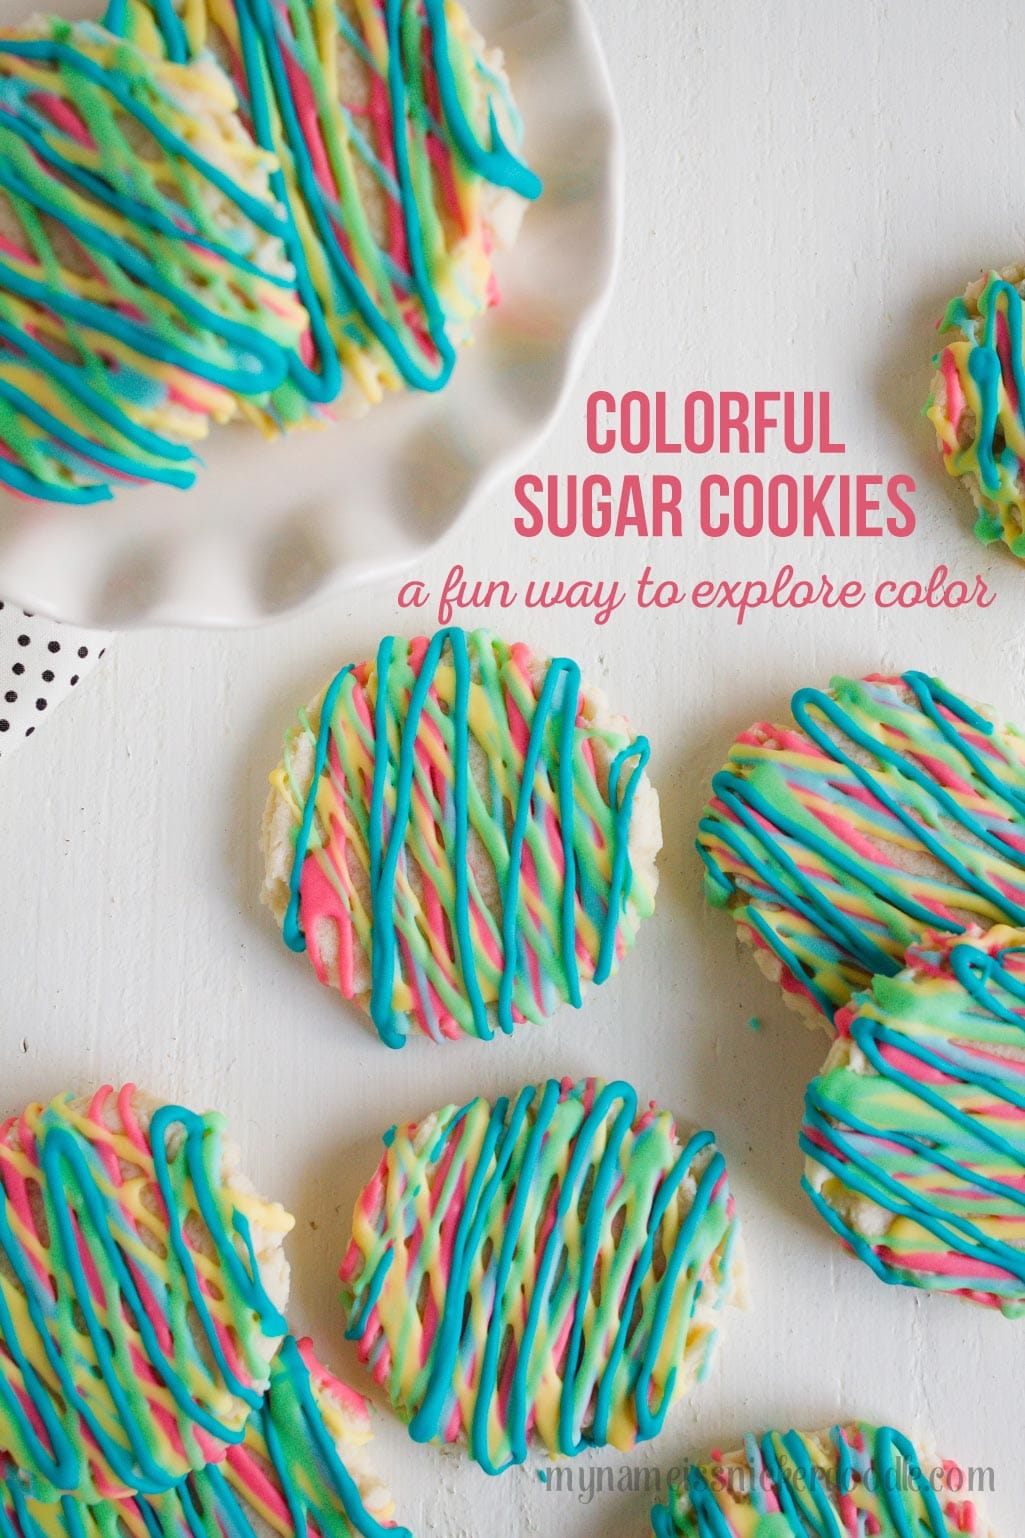 Colorful Sugar Cookies are a fun way to explore color and eat your food too. These delicious sugar cookies are made with an easy recipe that will keep you coming back for more. It will become your new go to sugar cookie recipe. #sugarcookies #cookierecipe #sugarcookierecipe #swigsugarcookierecipe